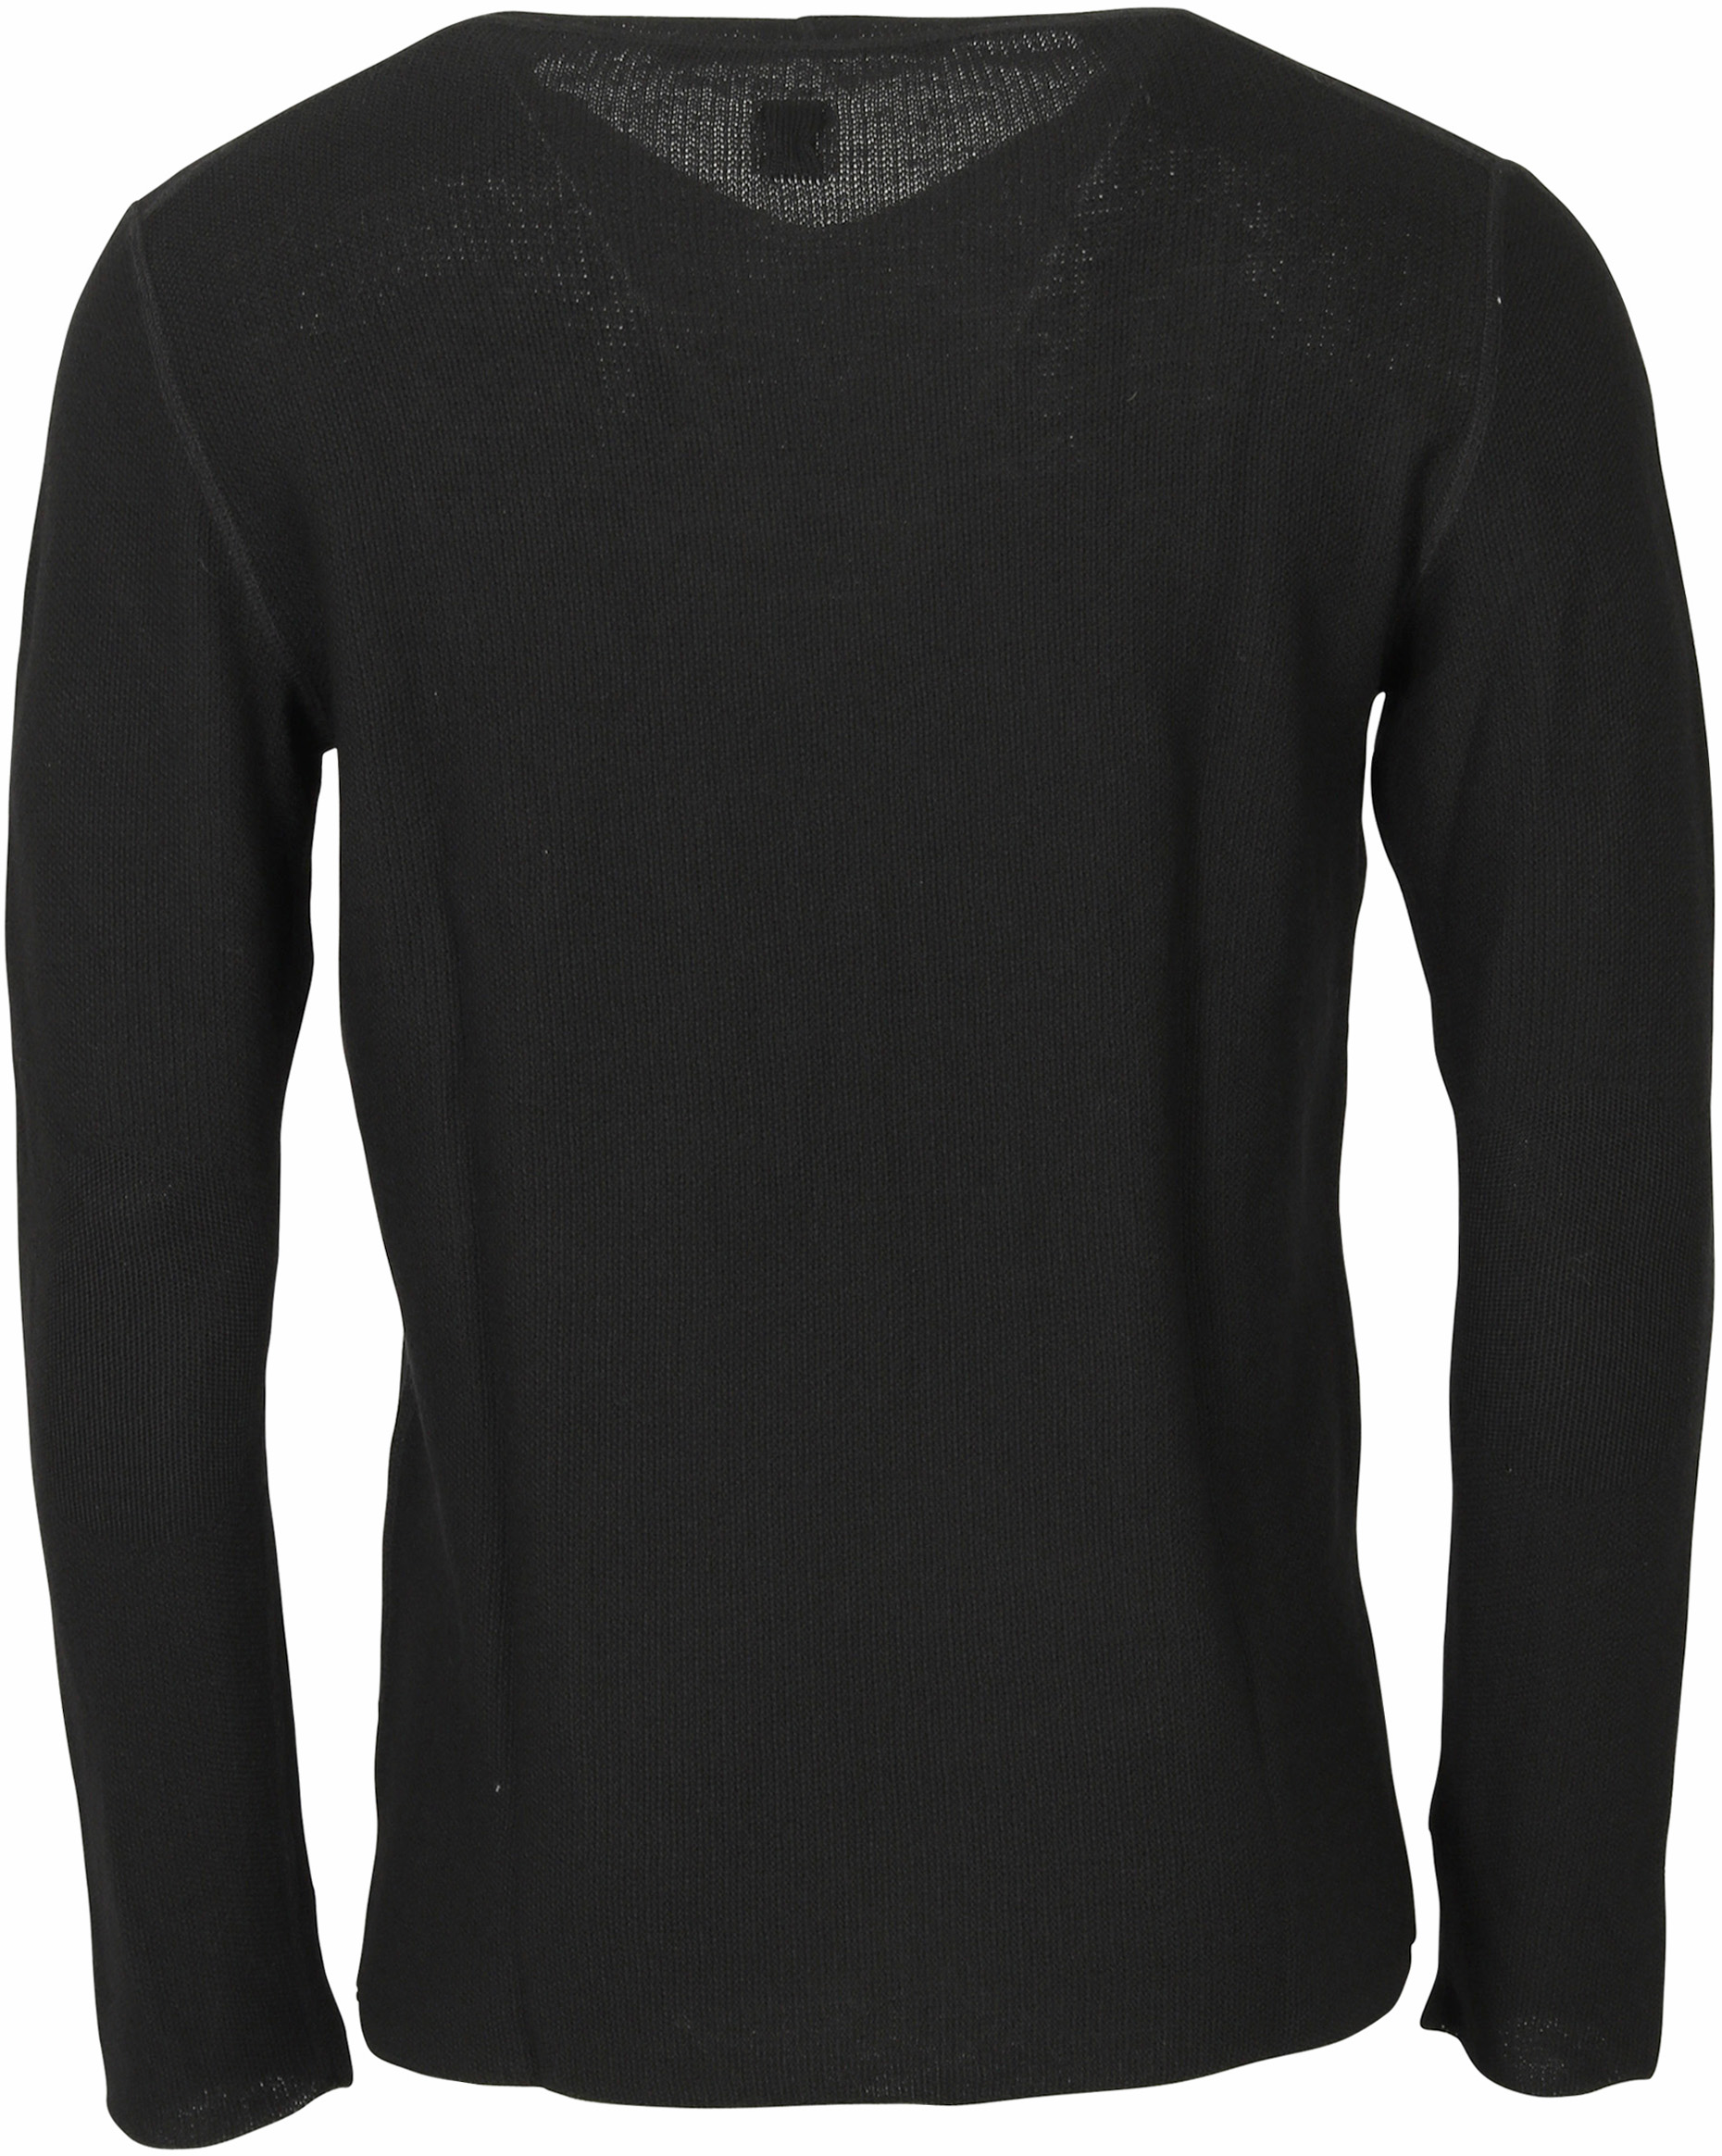 Hannes Roether Pullover Black